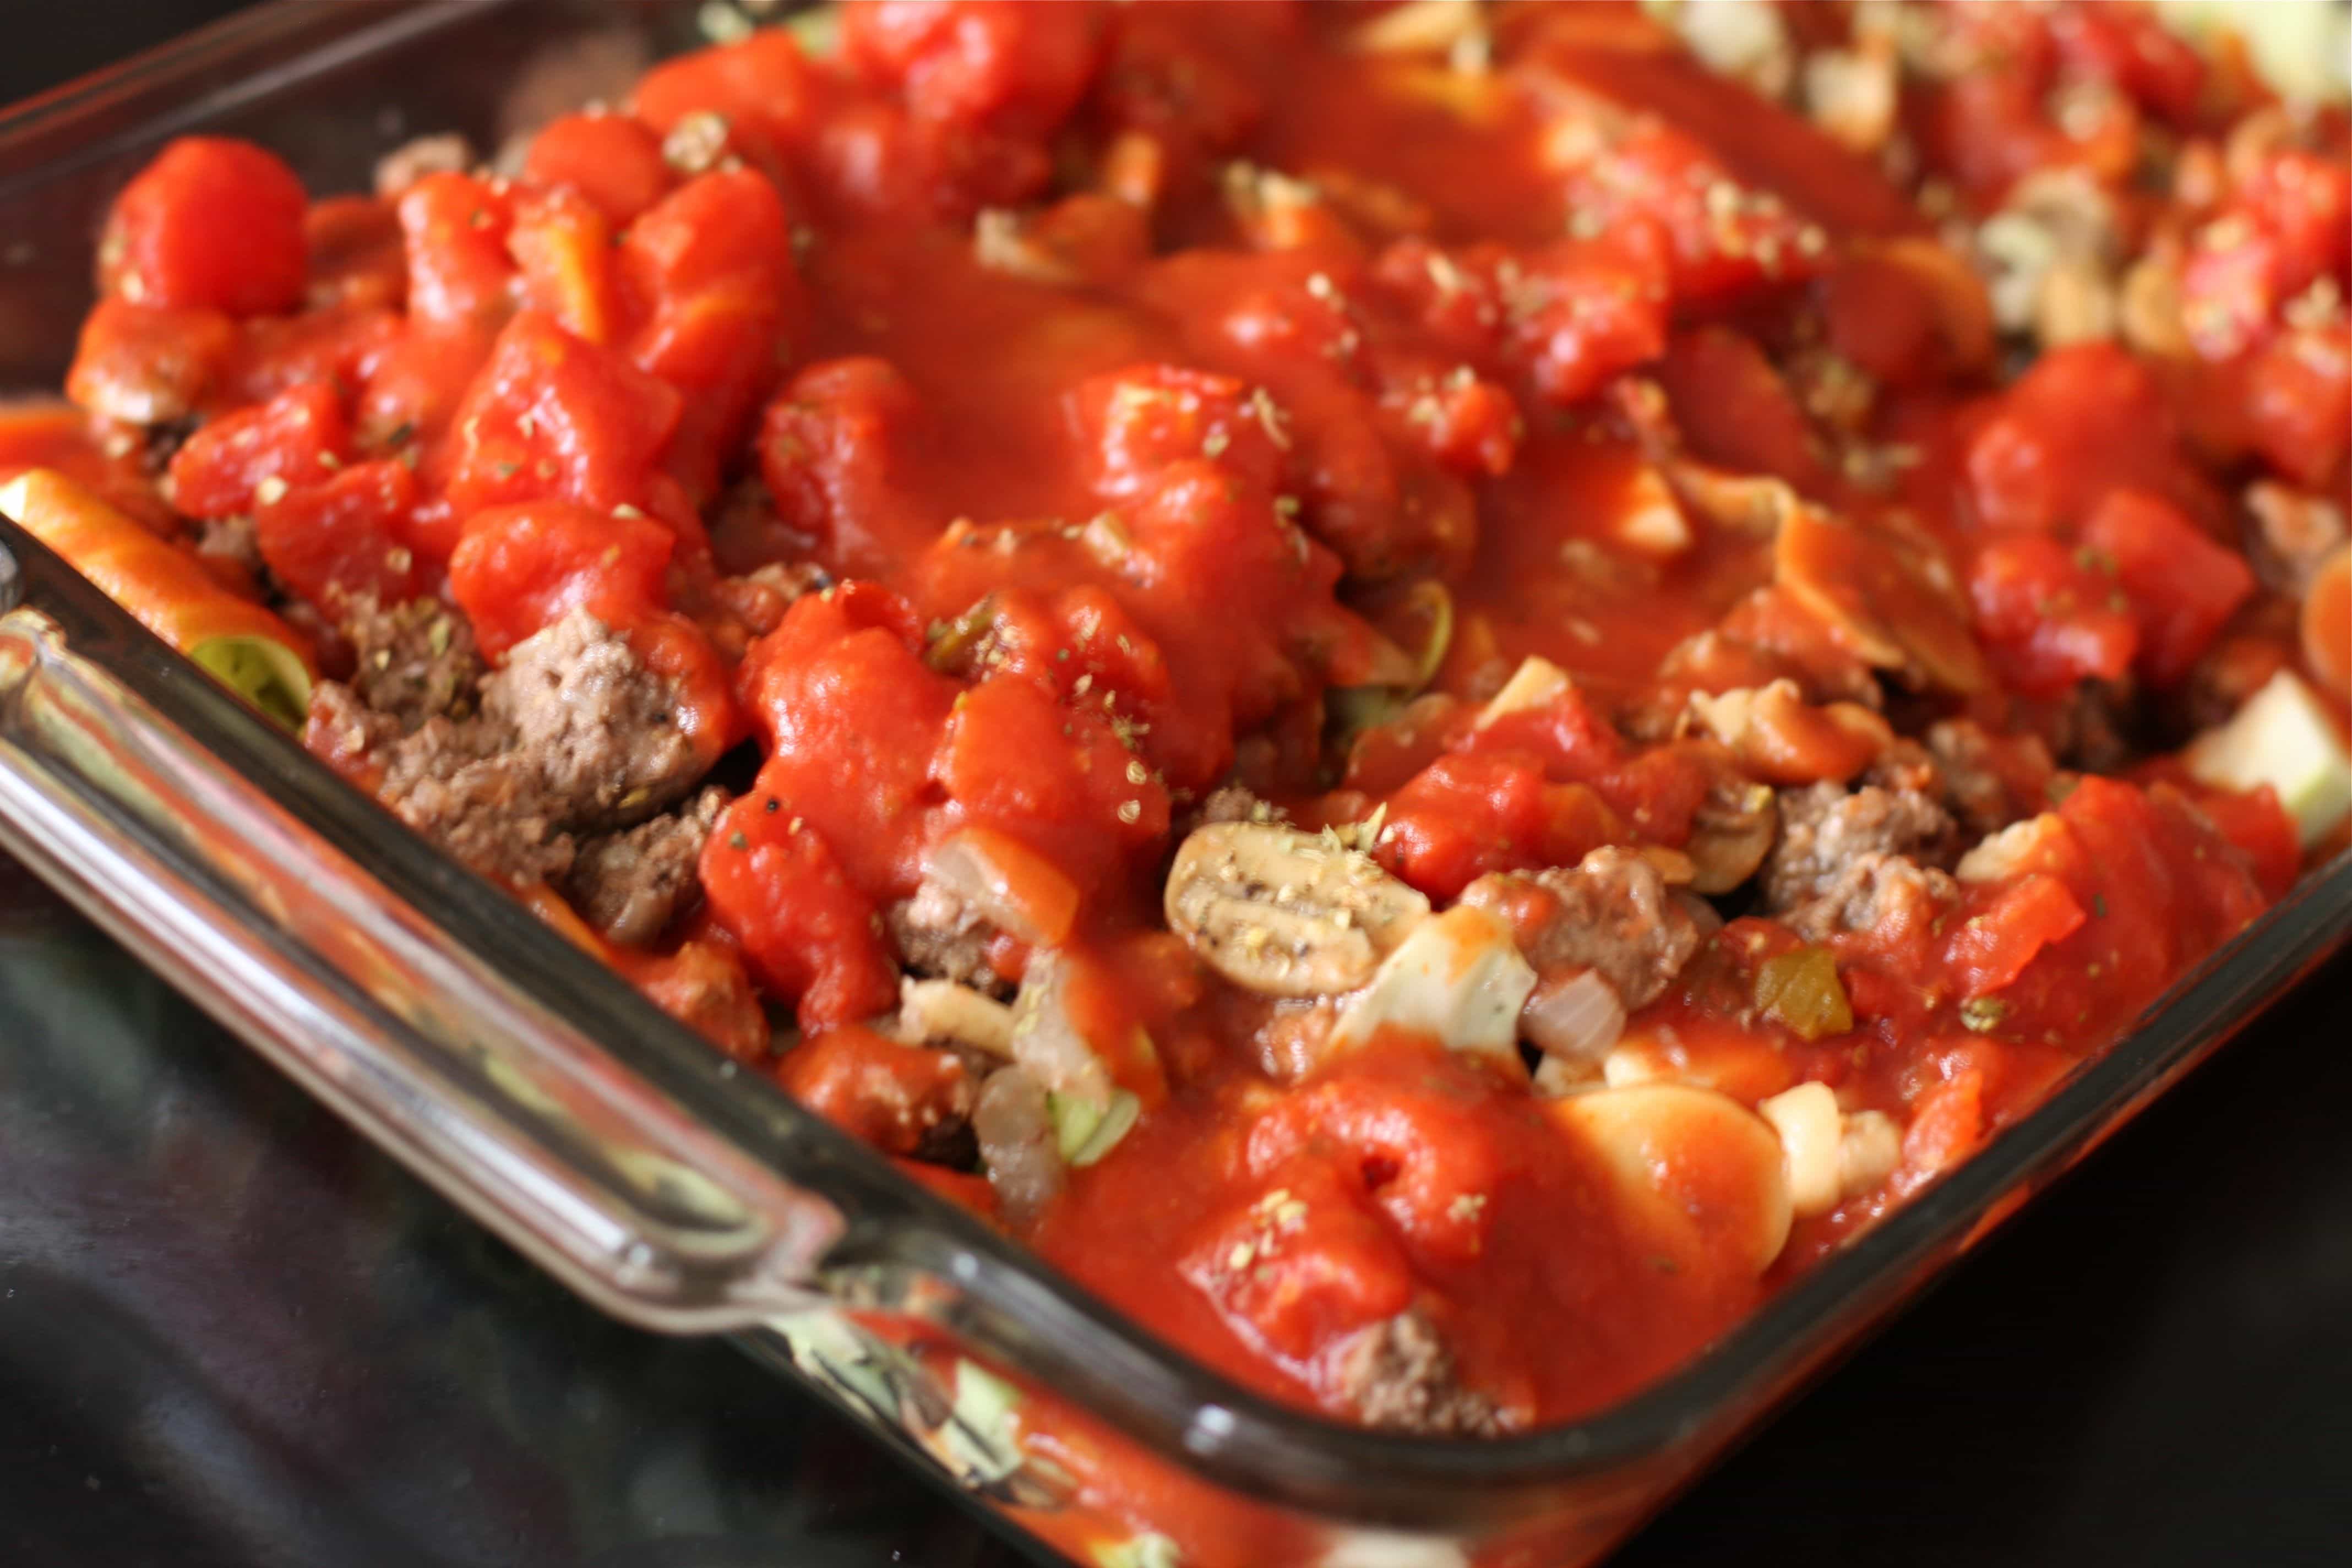 Stuffed Cabbage Casserole,Pizza Toppings Ideas